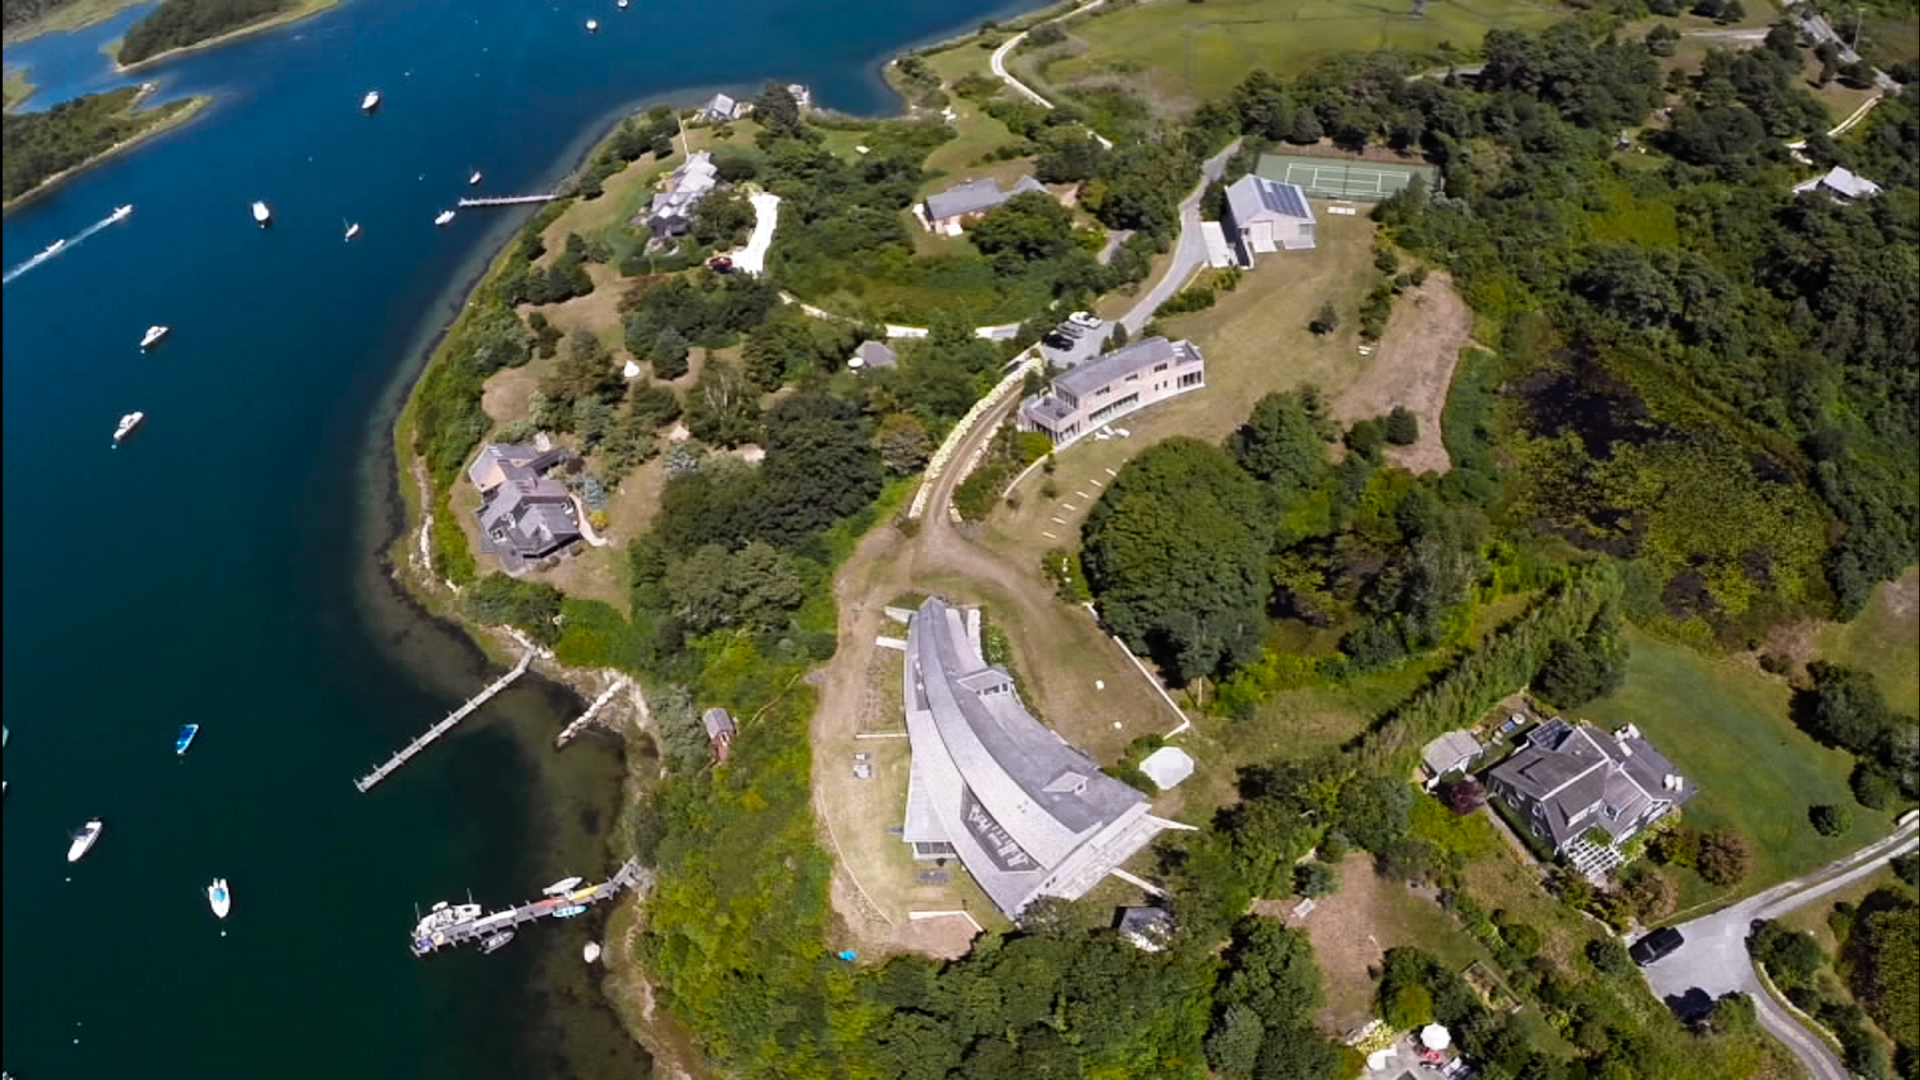 A controversial Martha's Vineyard mansion with accessory structures (center) convinced many citizens to address zoning laws in Chilmark